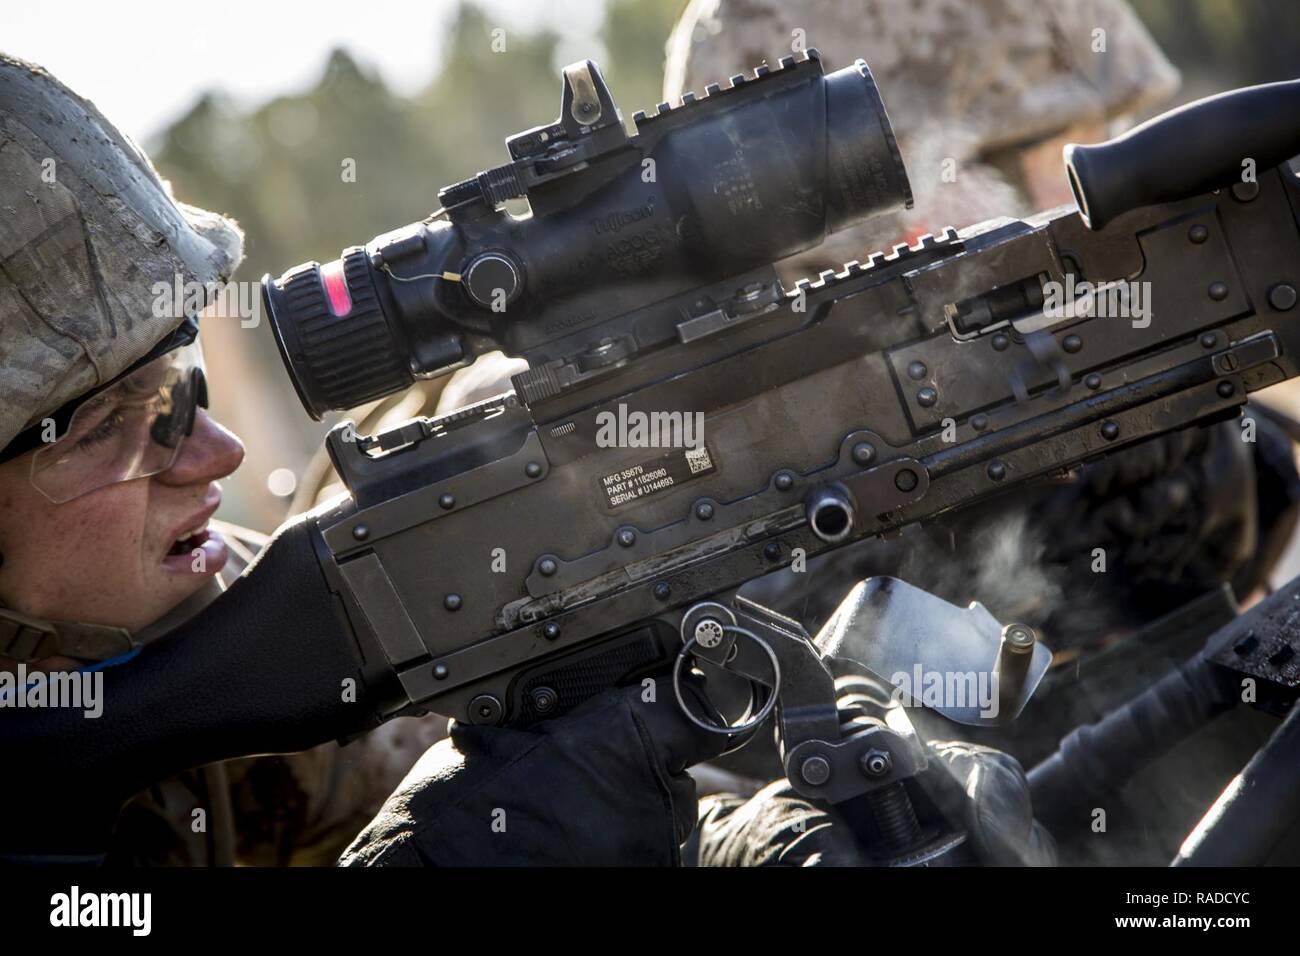 A U.S. Marine with Kilo Company, Marine Combat Training Battalion (MCT), School of Infantry-East, fires a M240G Medium Machinegun during a live fire exercise on Camp Lejeune, N.C., Jan. 13, 2017. Marines attending MCT conducted a live fire exercise to familiarize themselves with the weapon system. Stock Photo